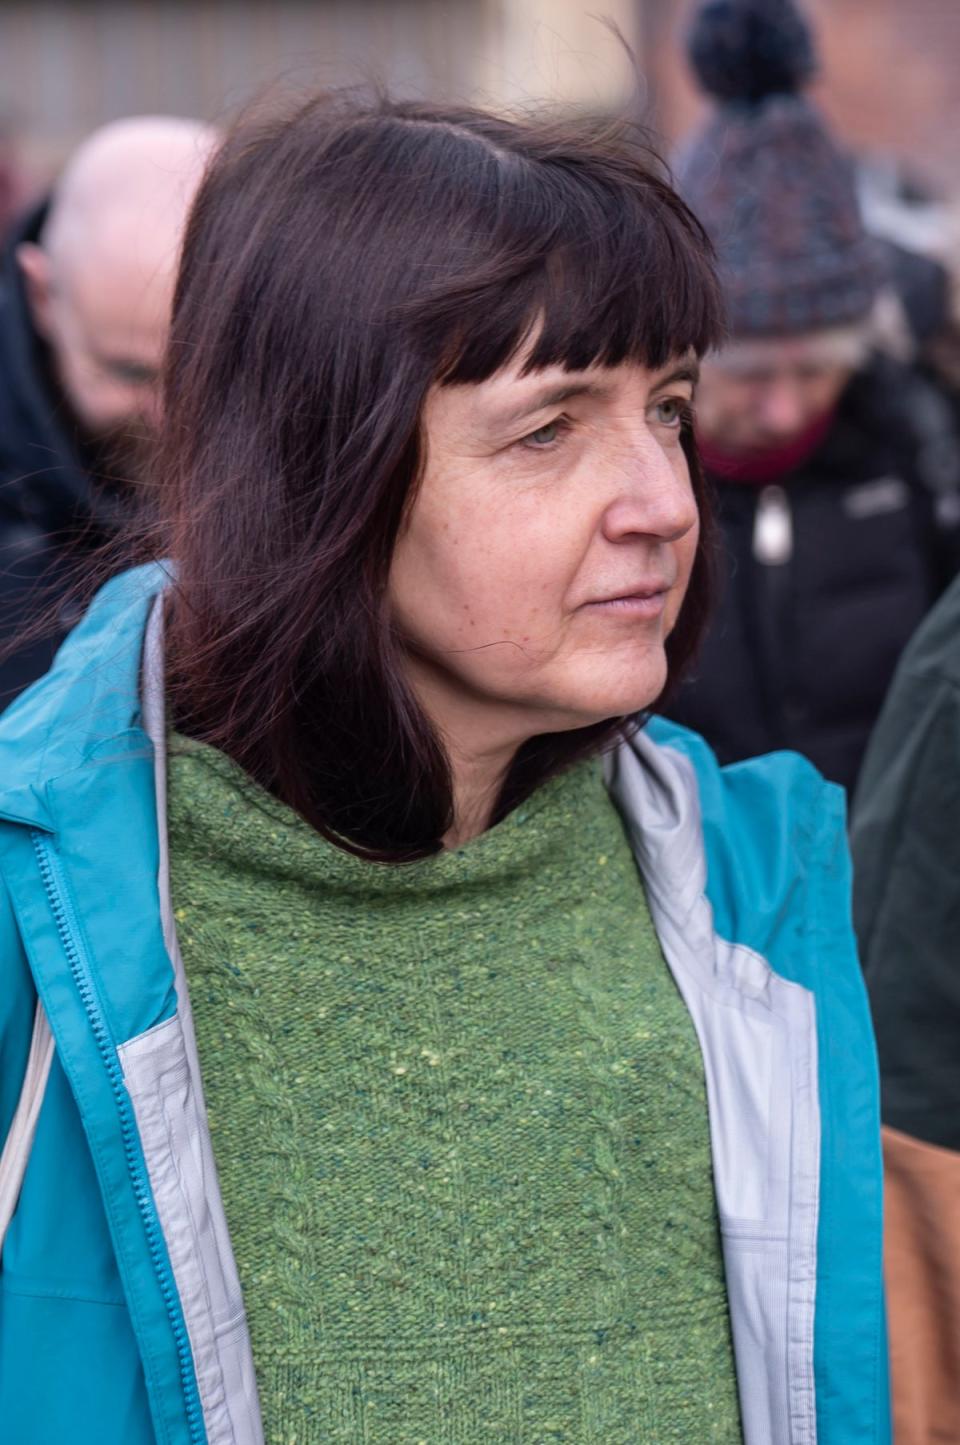 Just Stop Oil activist Margaret Reid outside Sheffield Magistrates' Court in January (PA)